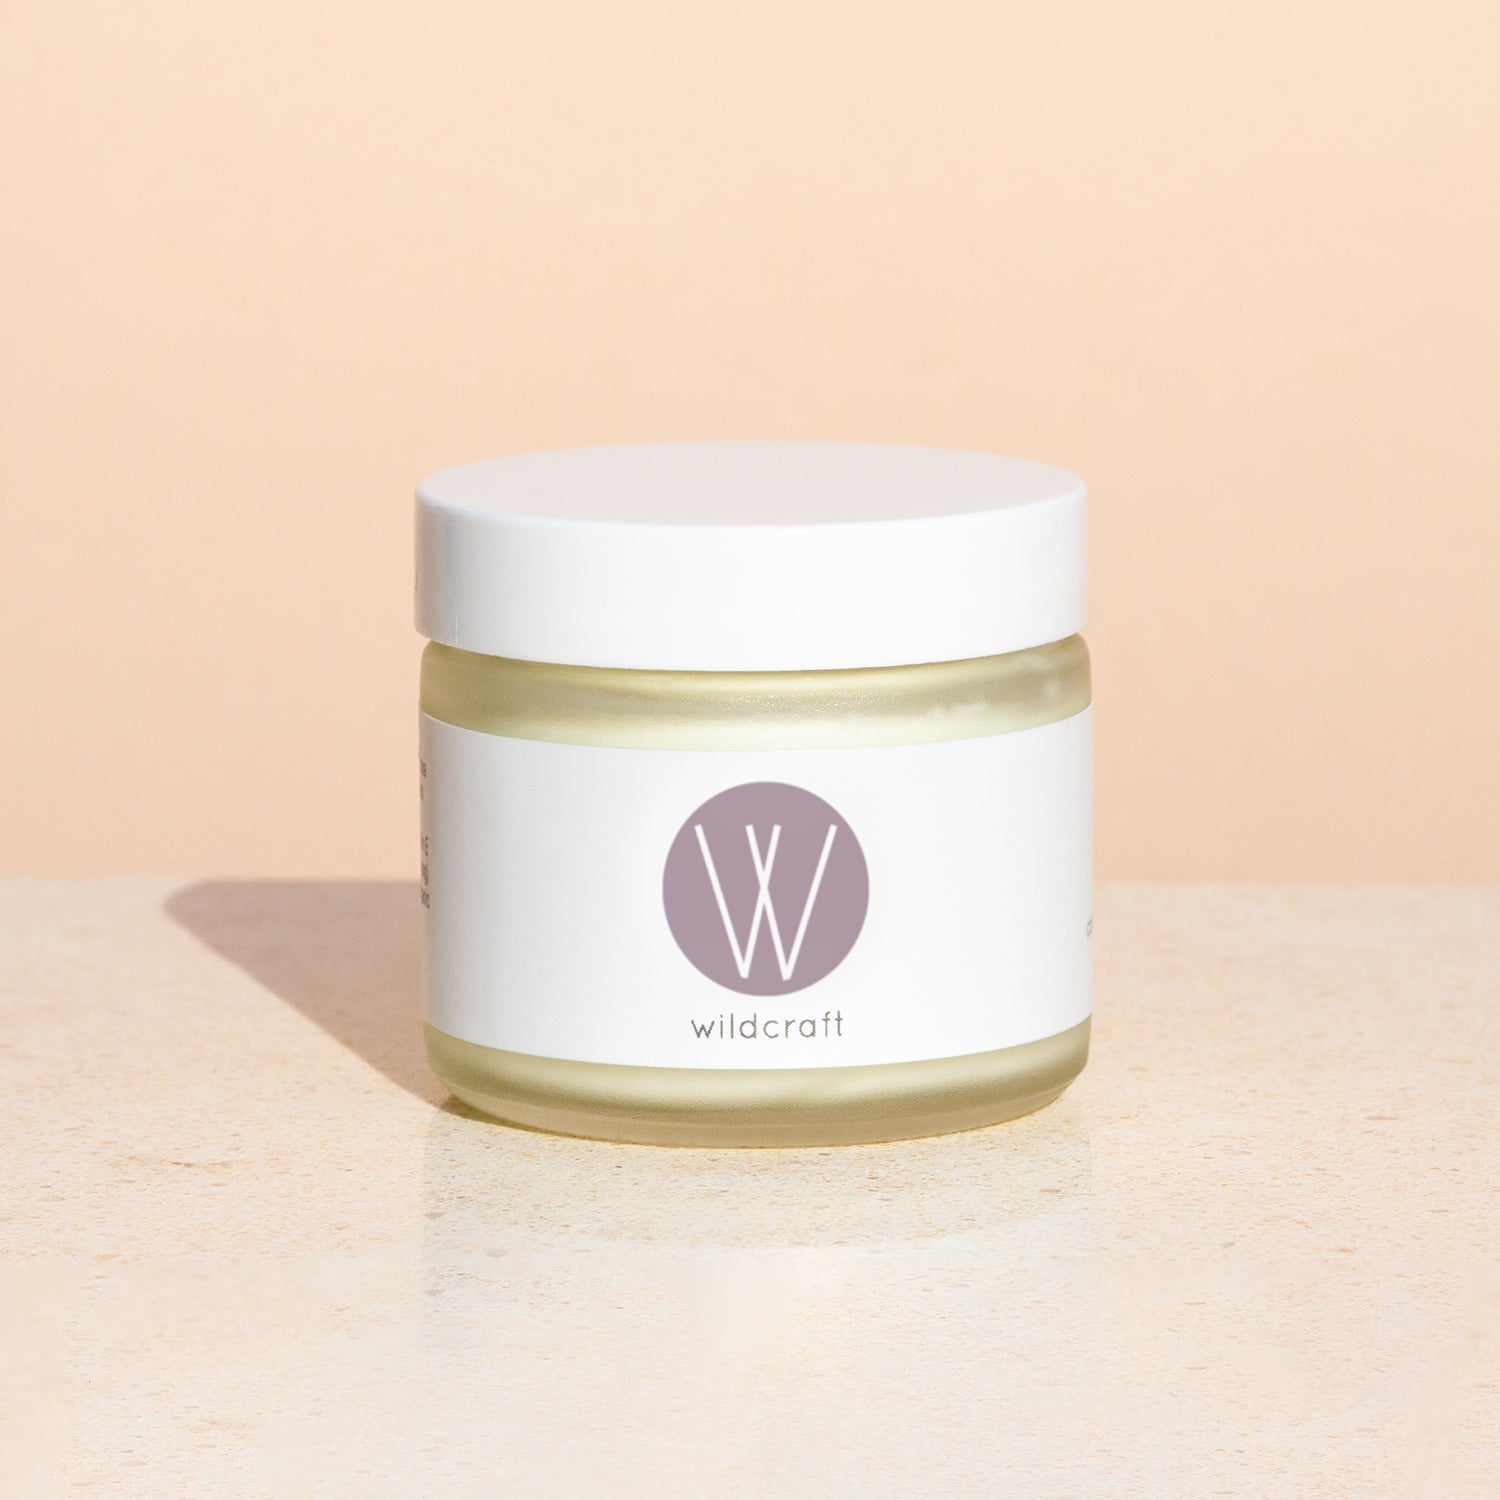 Jar of Clarify Face Cream on a simple background